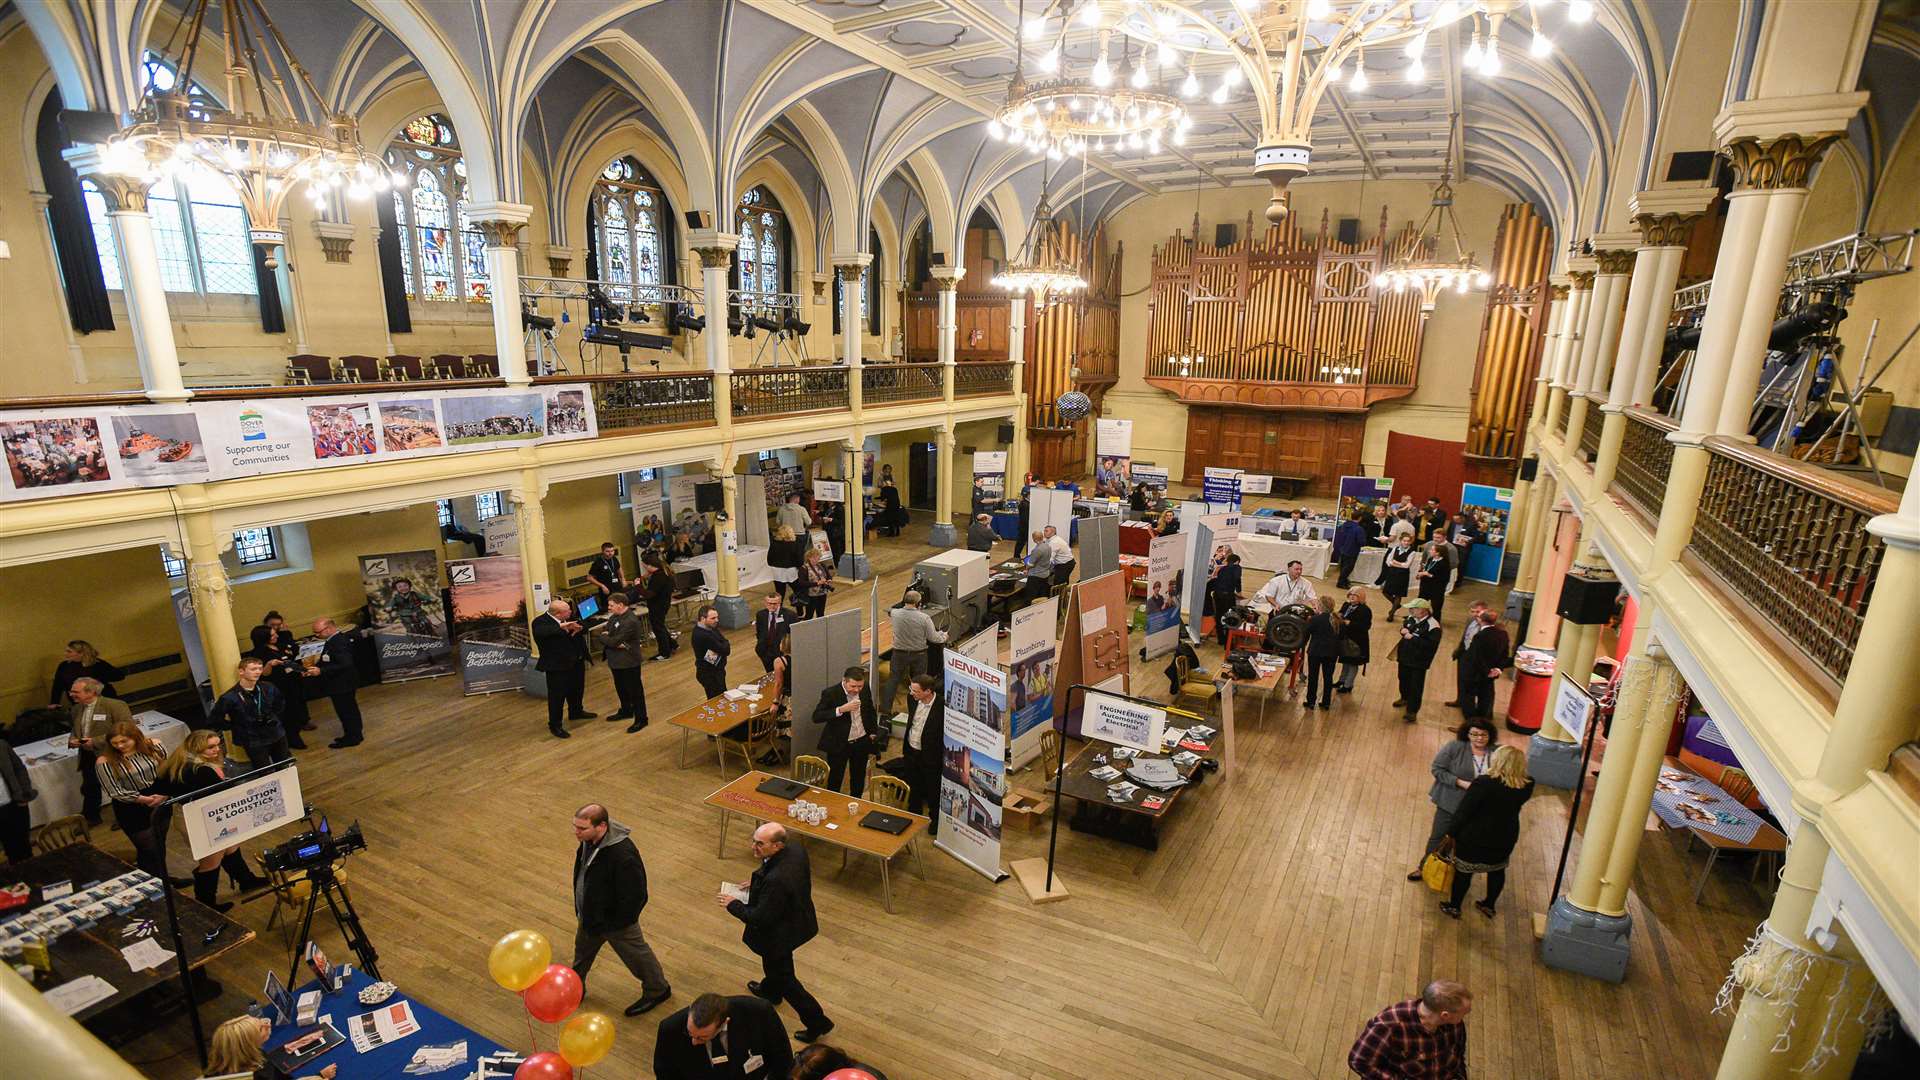 The Skills 4 Dover Expo at the town hall